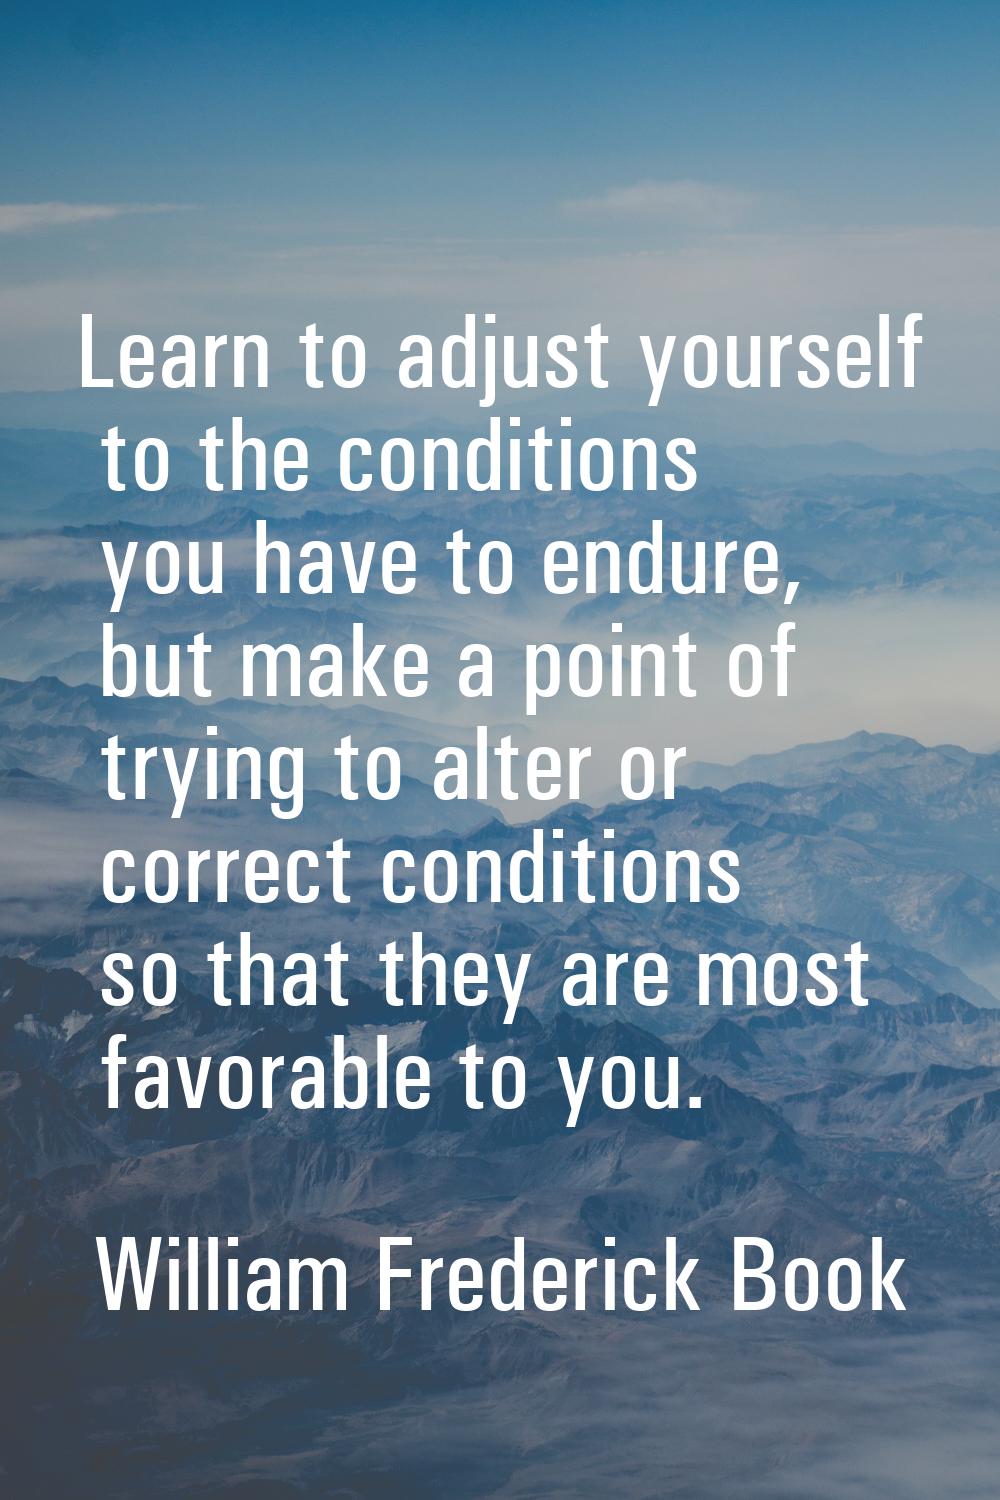 Learn to adjust yourself to the conditions you have to endure, but make a point of trying to alter 